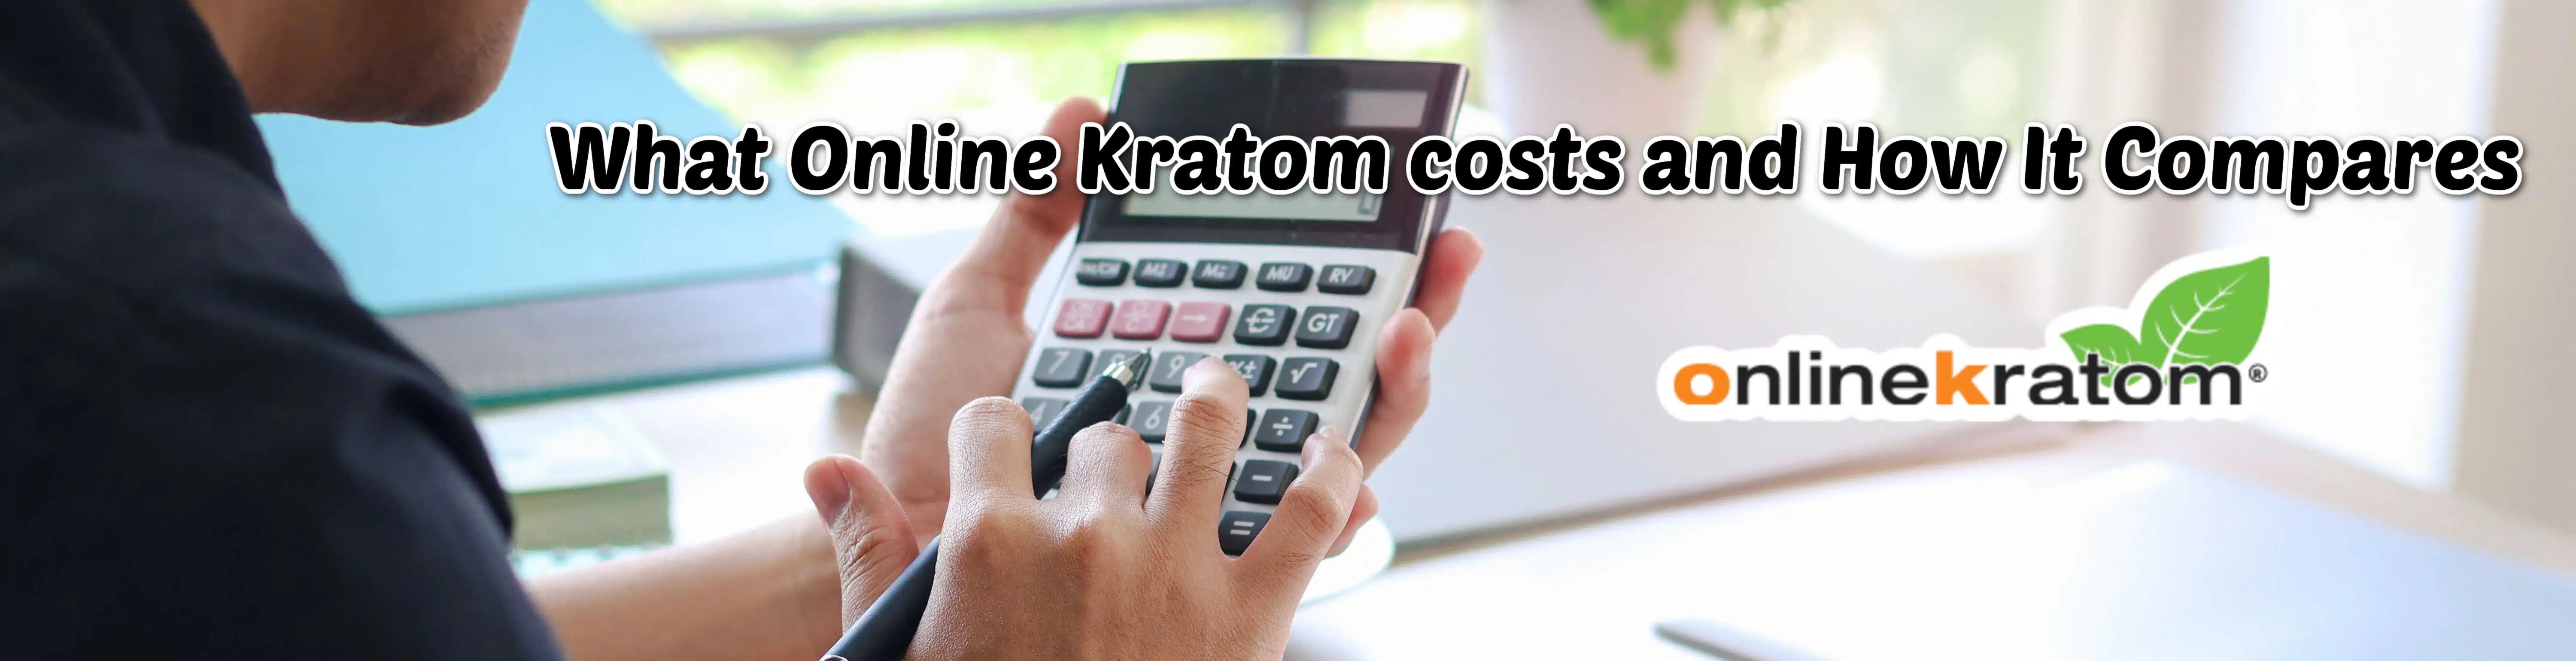 image of what online kratom costs and how it compares